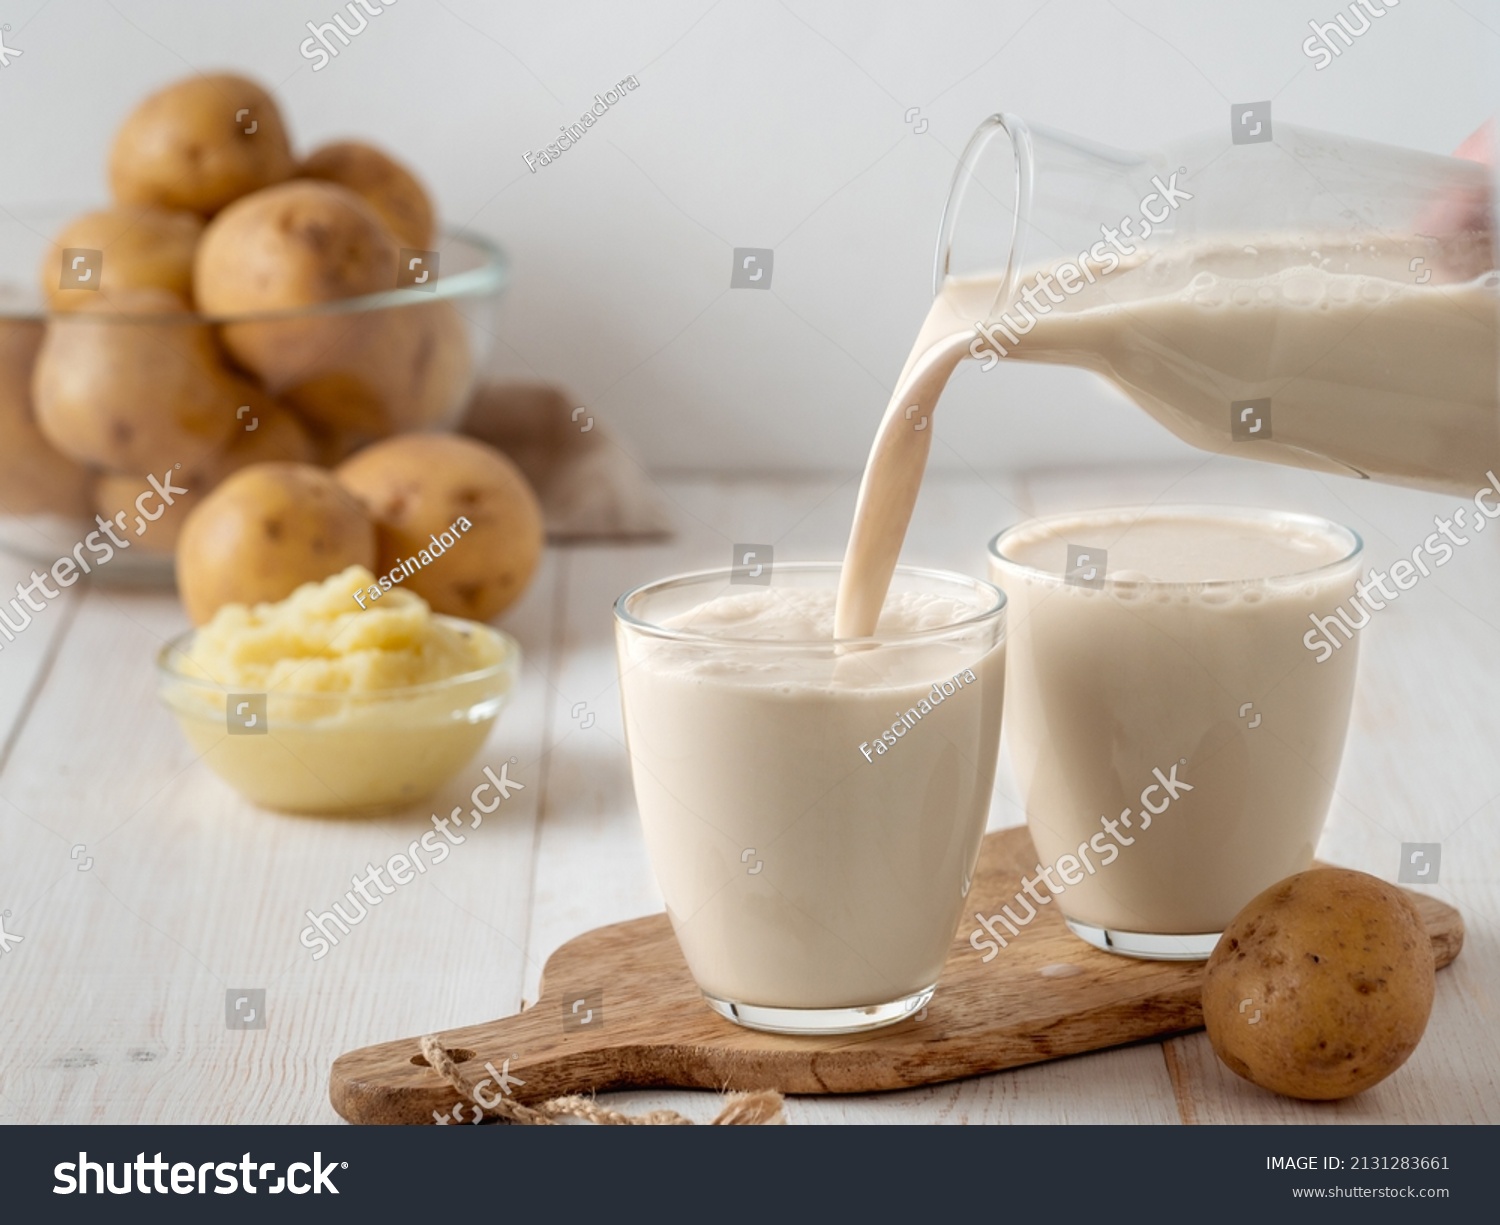 Potato milk pouring into glass on white wooden background. Pouring vegan milk in glass, with potato puree and potato tubers on background. Copy space. Home made potato milk made from boiled potatoes #2131283661